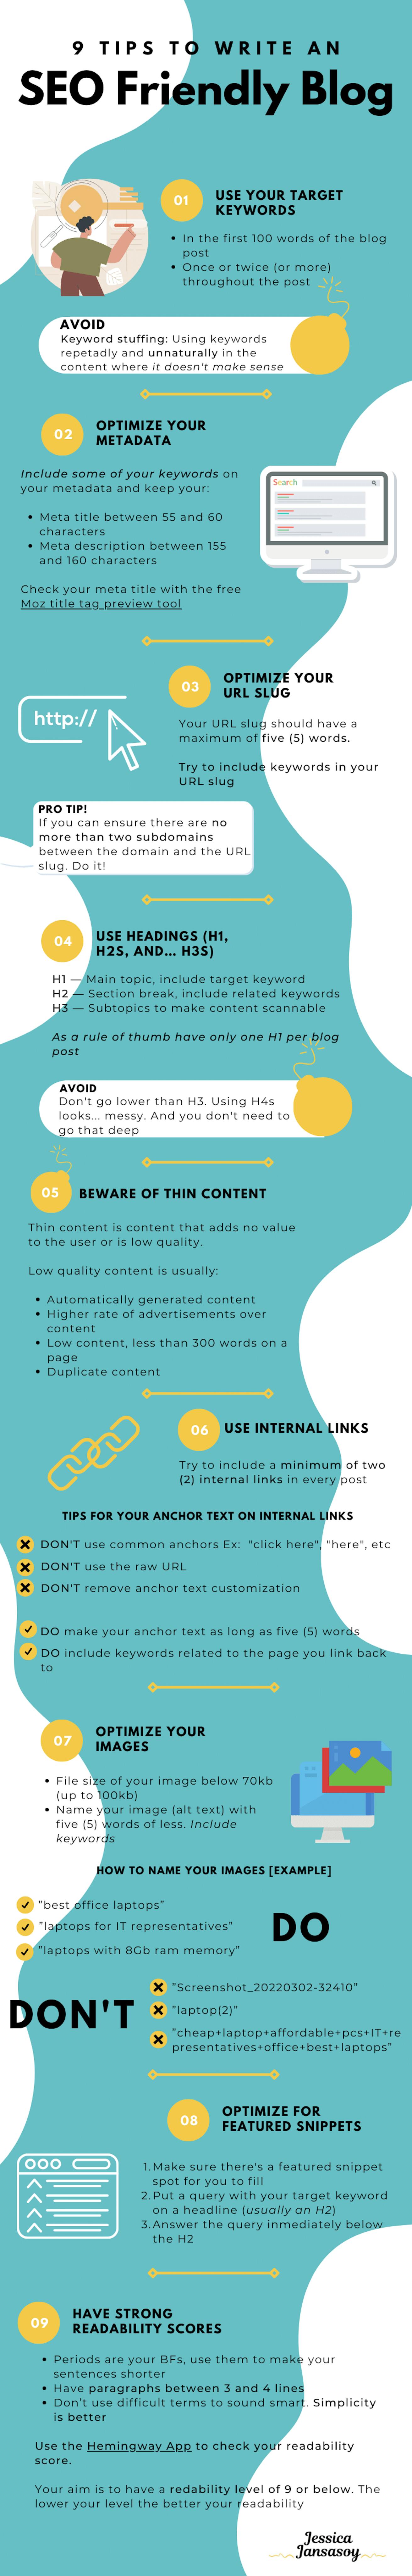 on-page SEO infographic